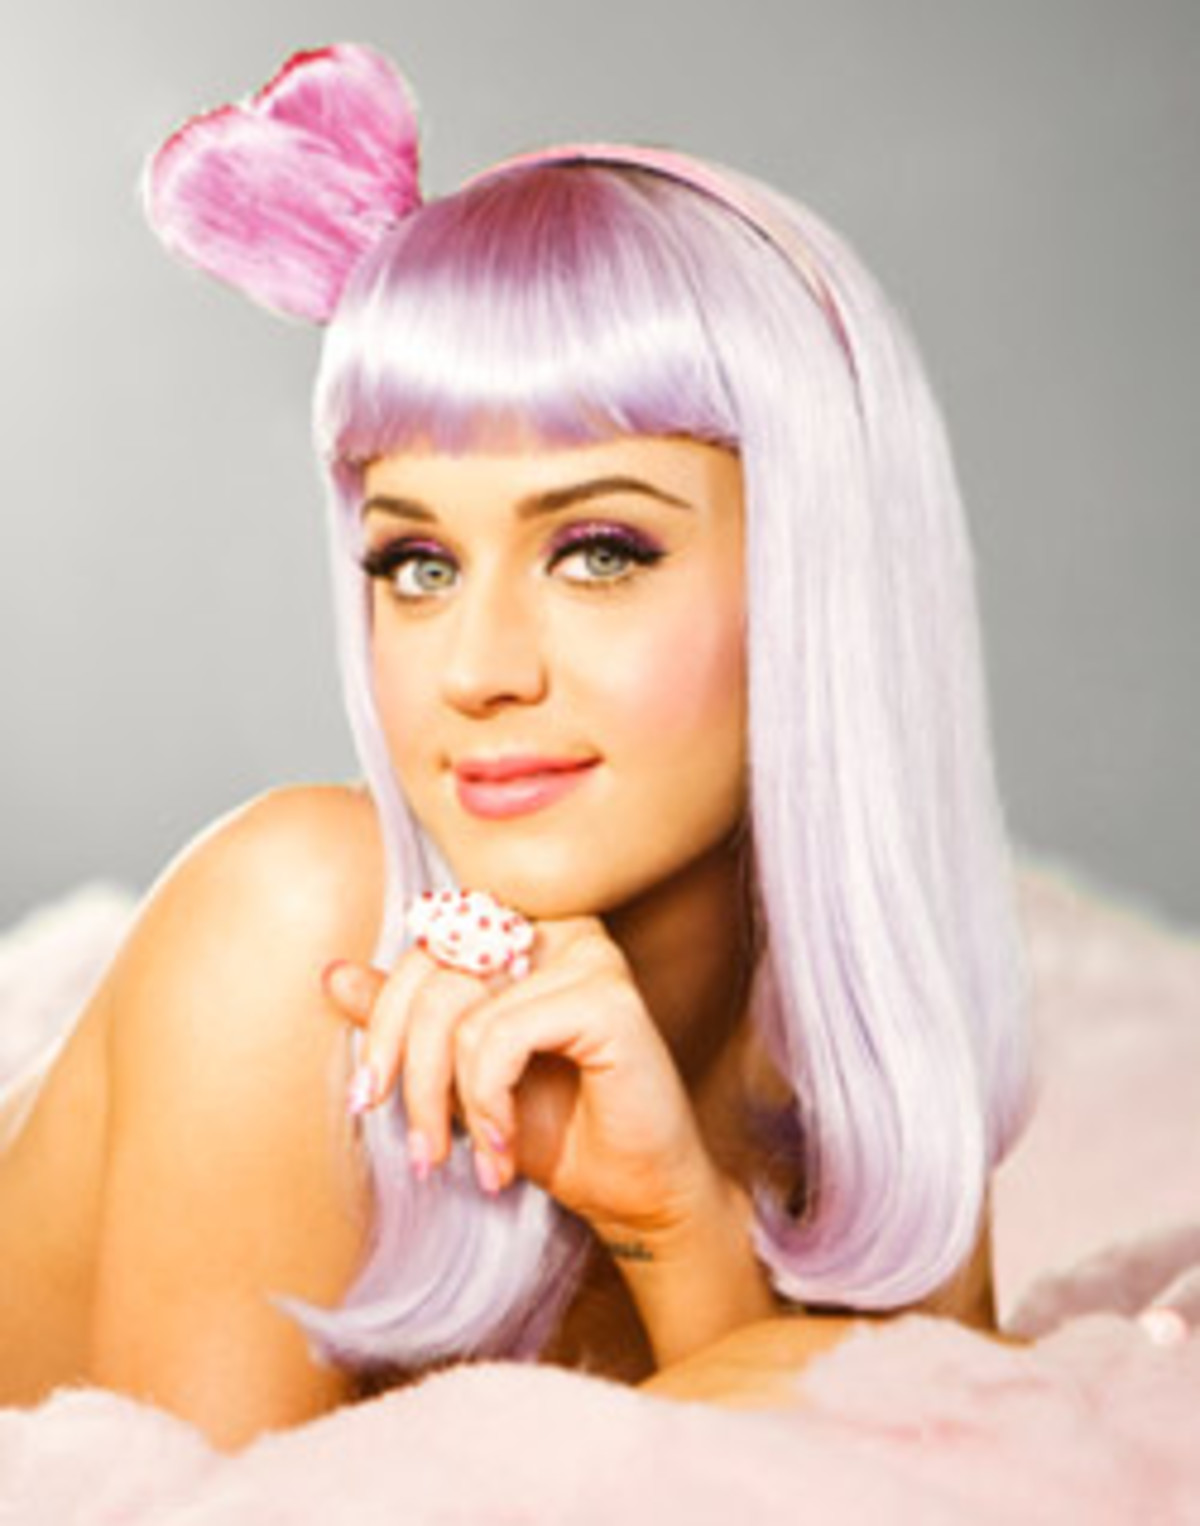 Katy Perry 最新music Video The One That Got Away を公開